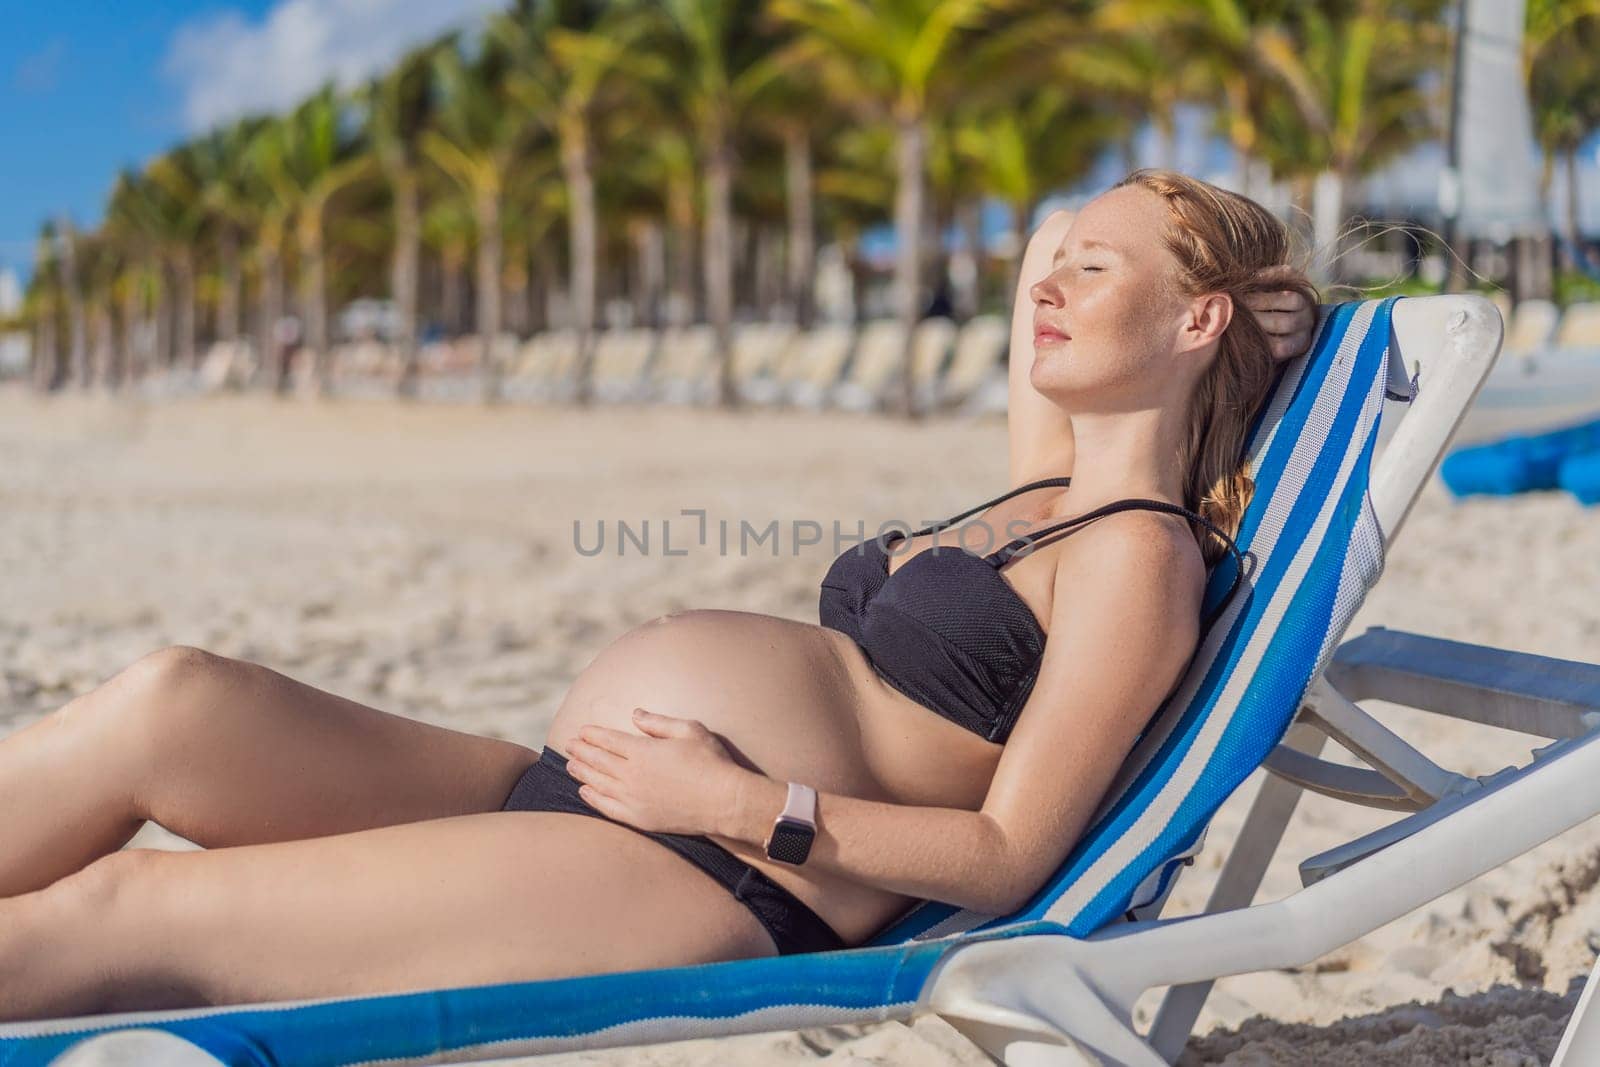 Basking in seaside tranquility, a pregnant woman lounges on a sun lounger, embracing the soothing ambiance of the beach for a moment of serene relaxation by galitskaya